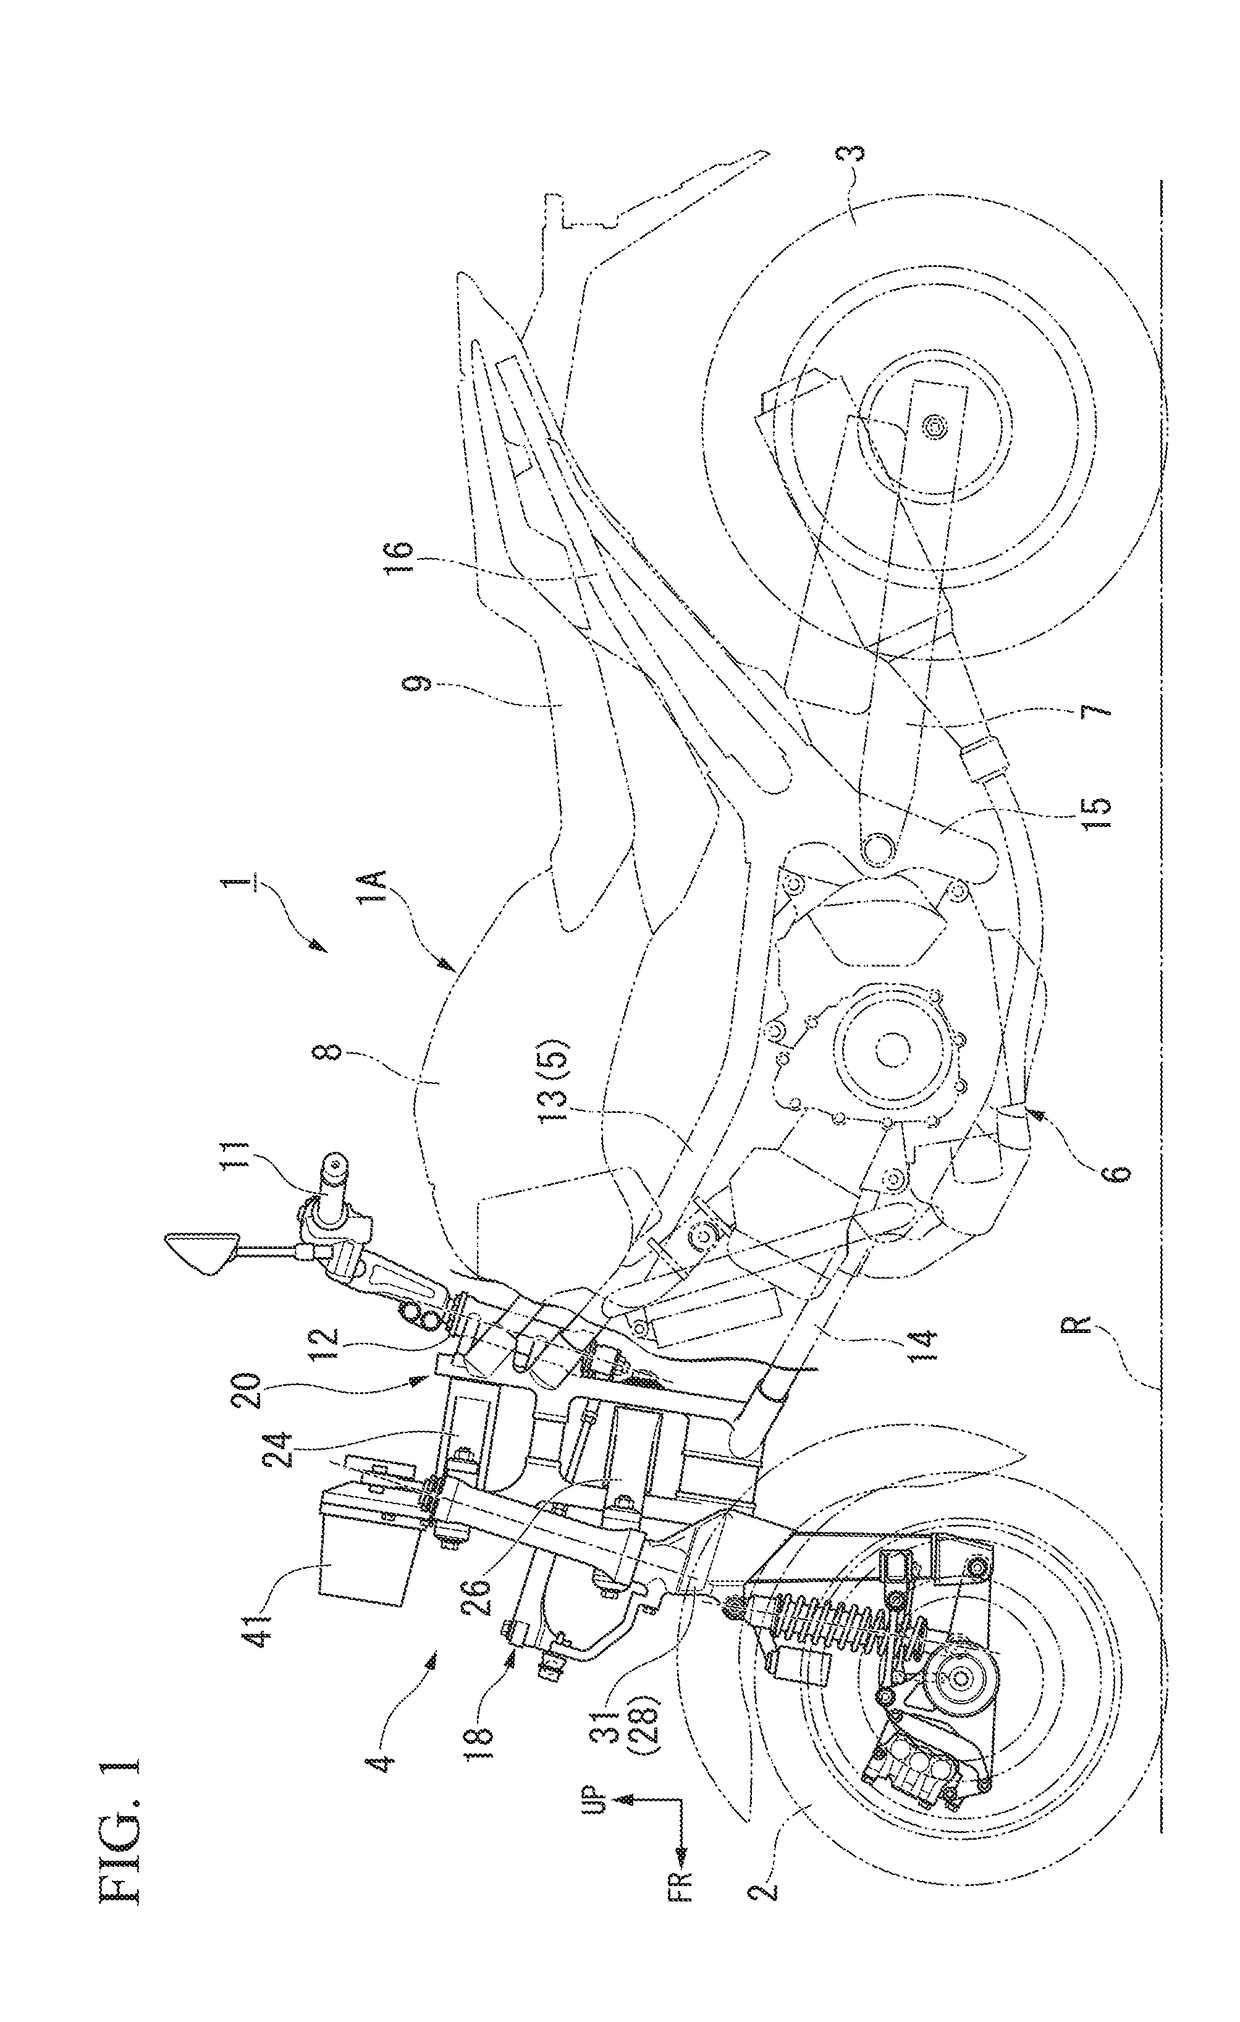 Rocking control device for two front wheels rocking vehicle